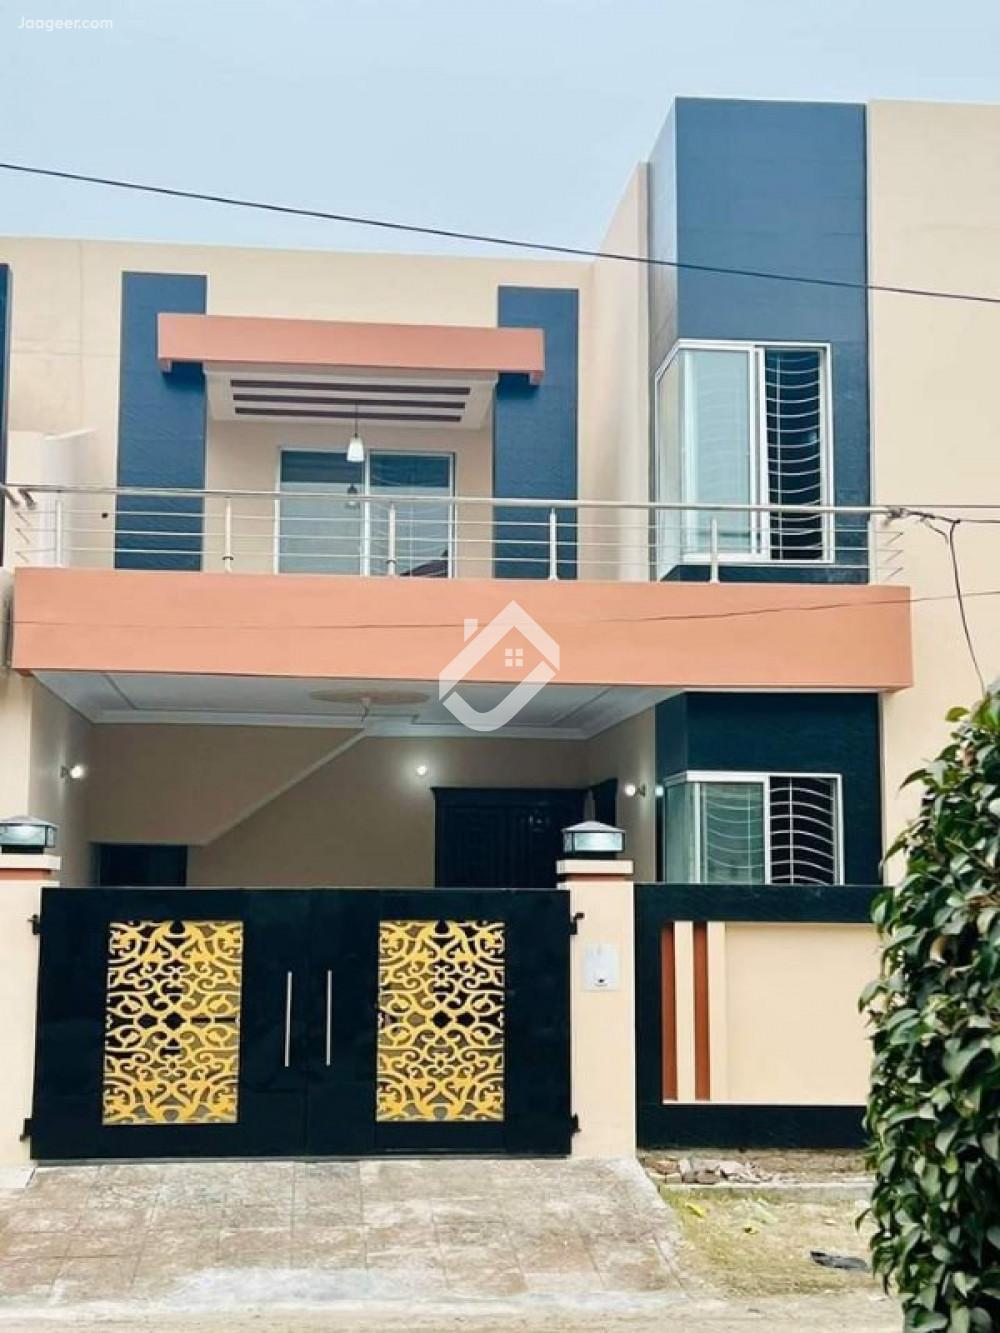 6 Marla Double Storey Lavish House For Sale In National Town Faisalabad Road in National Town, Sargodha